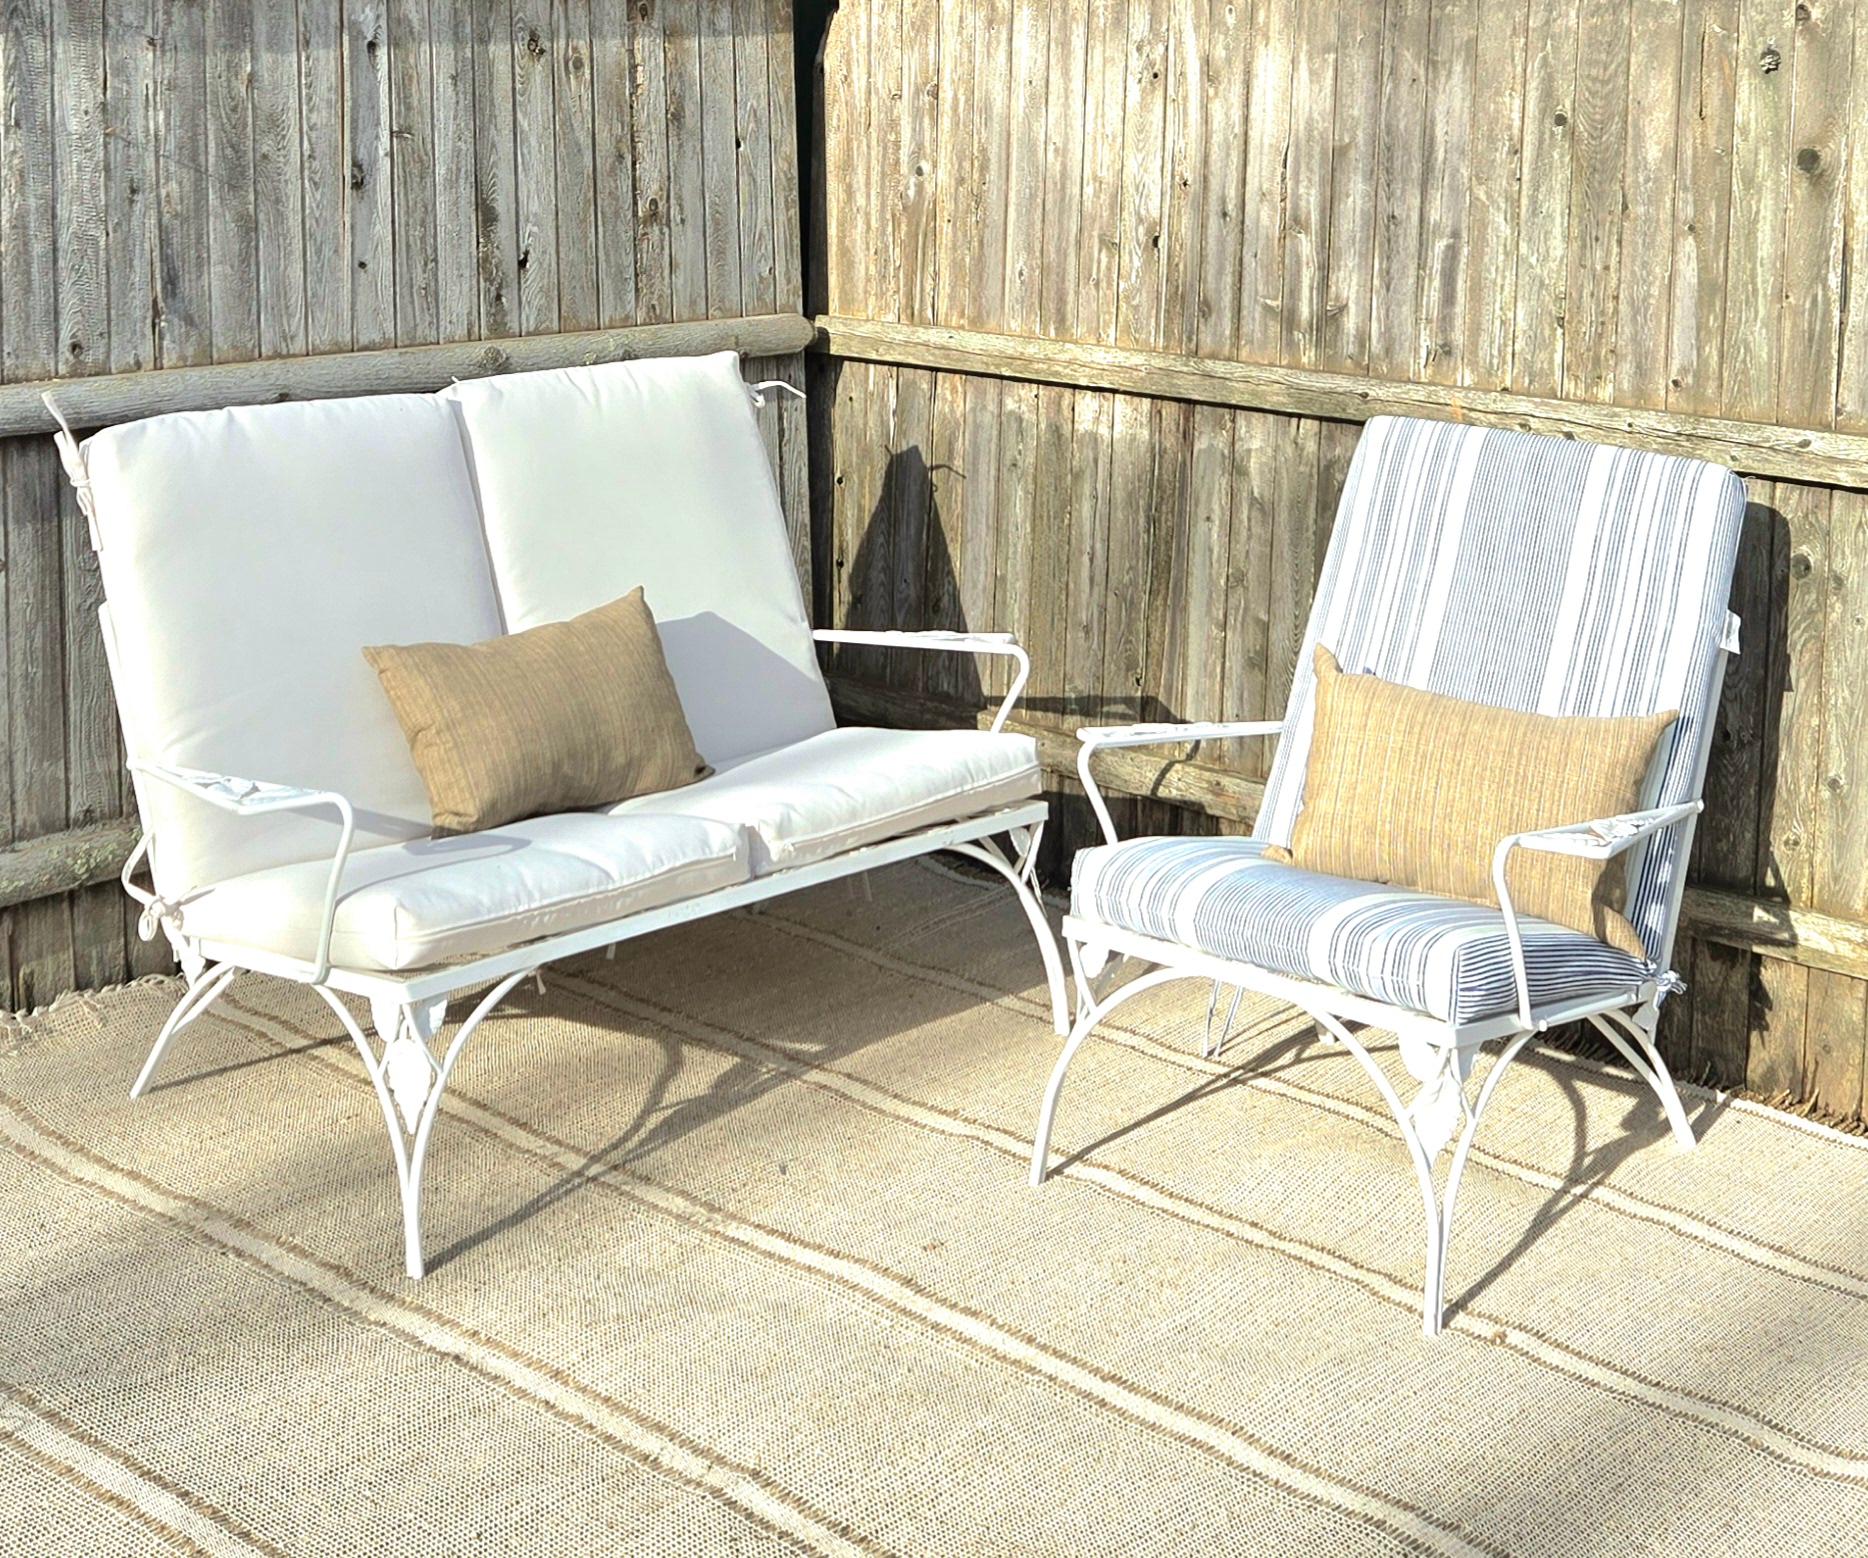 This is a beautiful set of vintage patio furniture by Woodard, a renowned brand in outdoor furniture. The set includes a 2 person sofa and side arm Lounge Chair with leaf motif. An excellent choice for any patio, balcony, or pool.


Made of